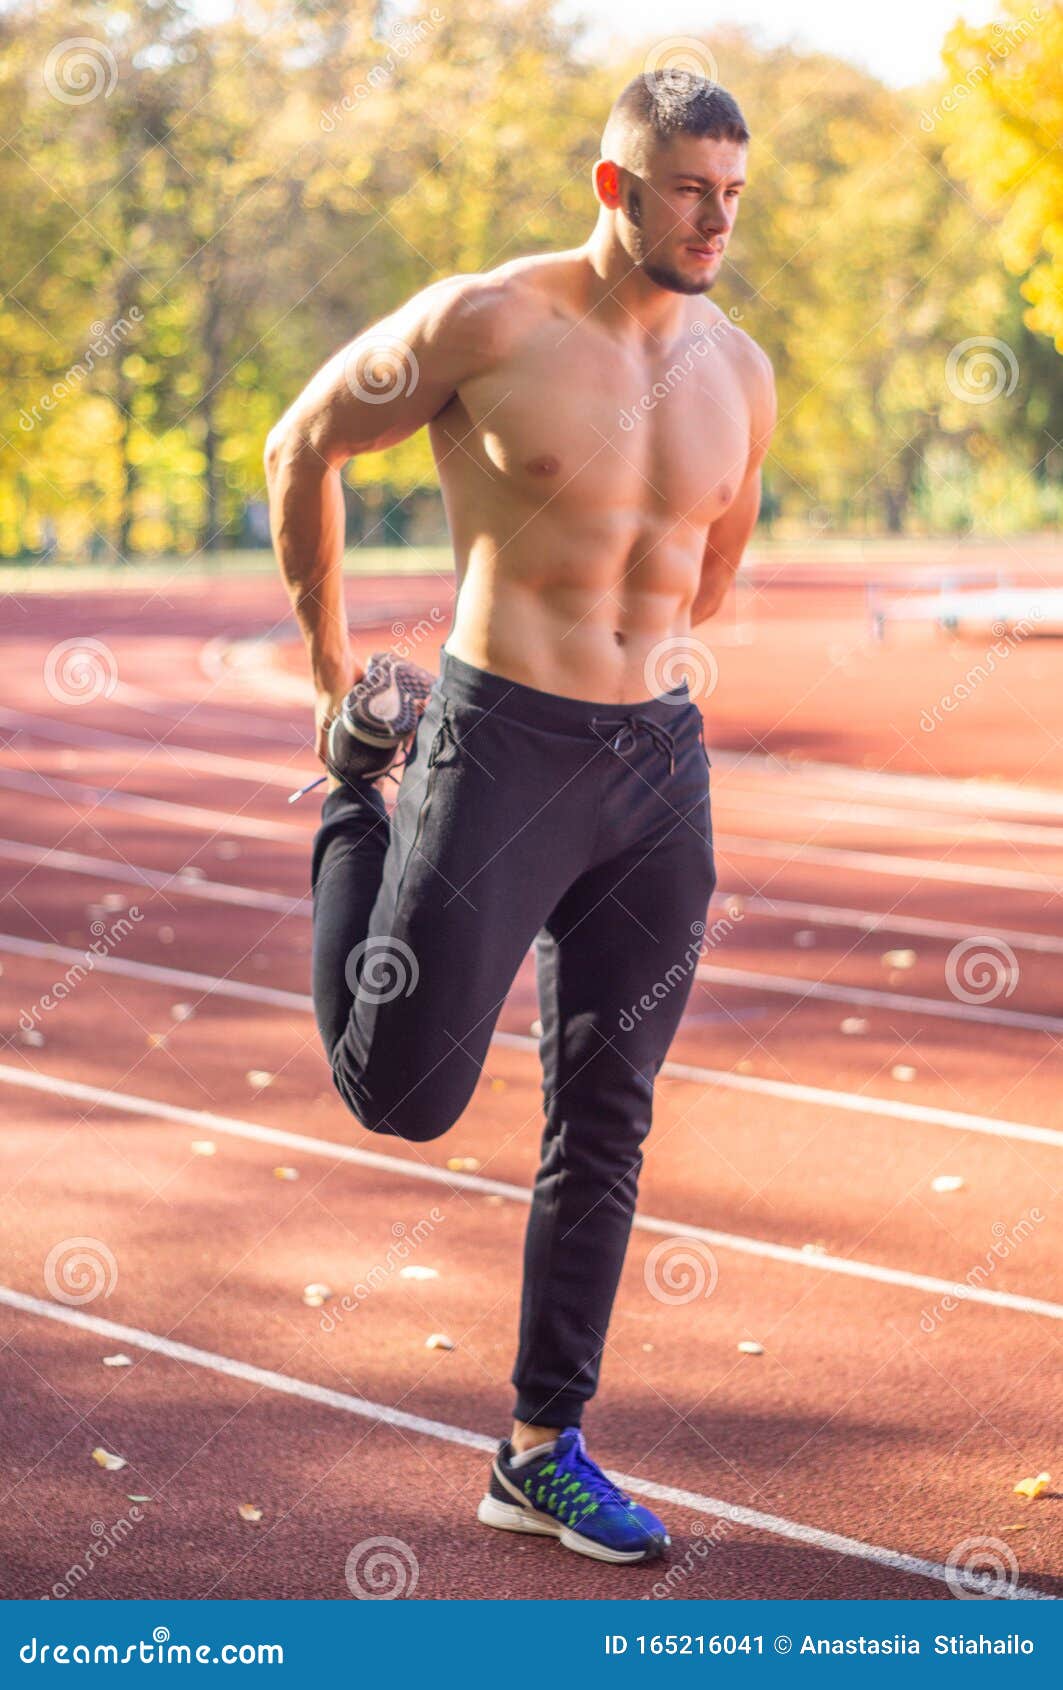 Male Model with Muscular Fit and Slim Body at the City Stadium